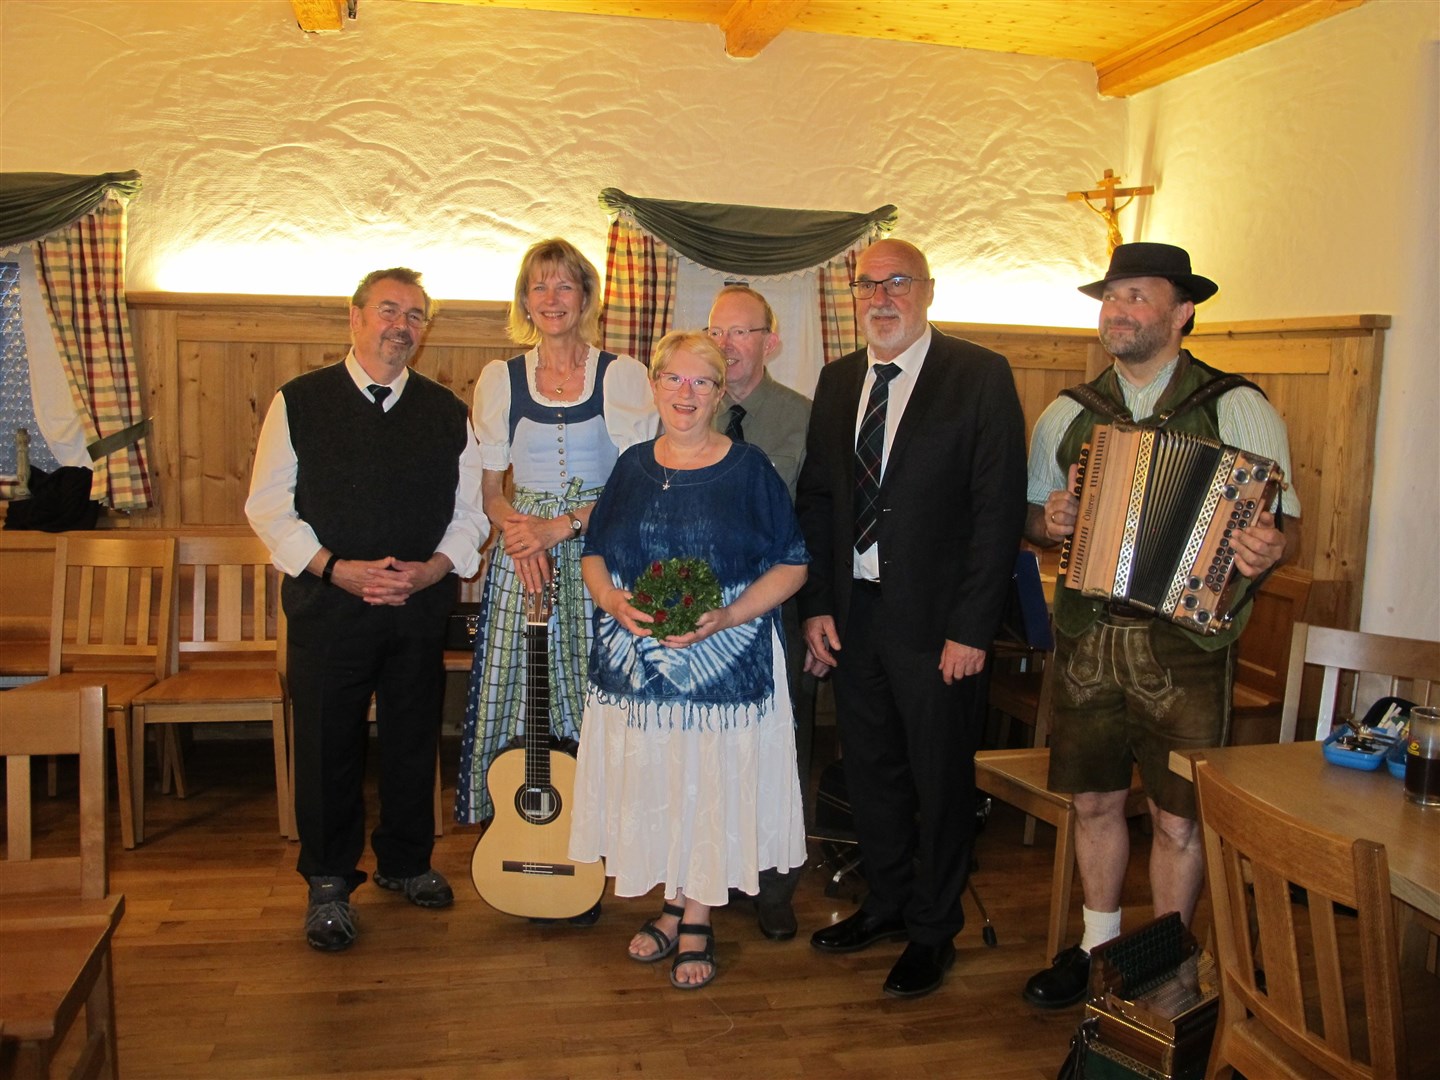 Eileen Duncan at a welcome dinner with Herr Schneck the Mayor of Landshut, the chairman of the Landshut twinning Association Elemer Dobrey and Bavarian traditional musicians.